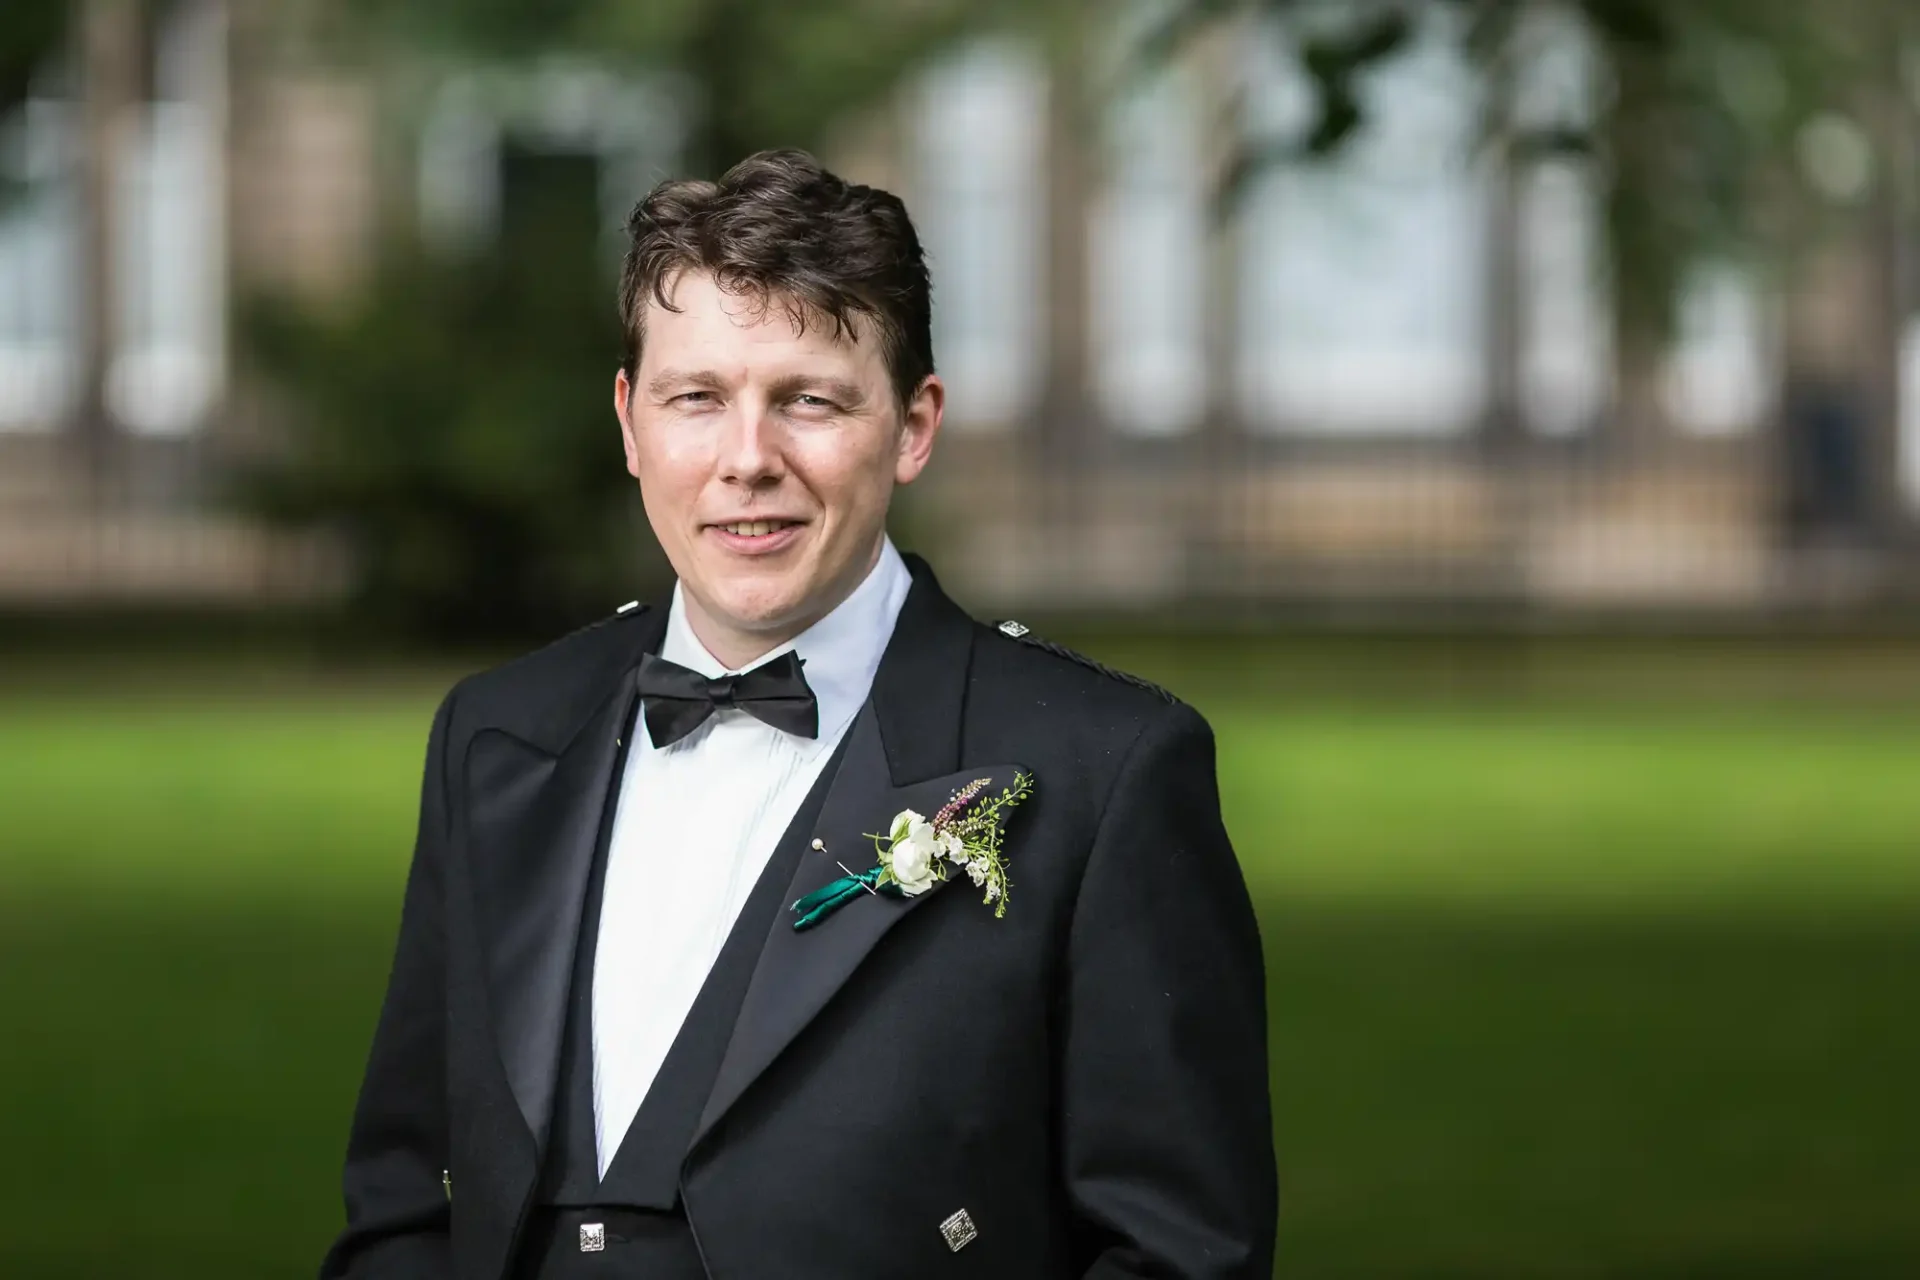 A man in a tuxedo with a bow tie and boutonniere smiling in a park setting.